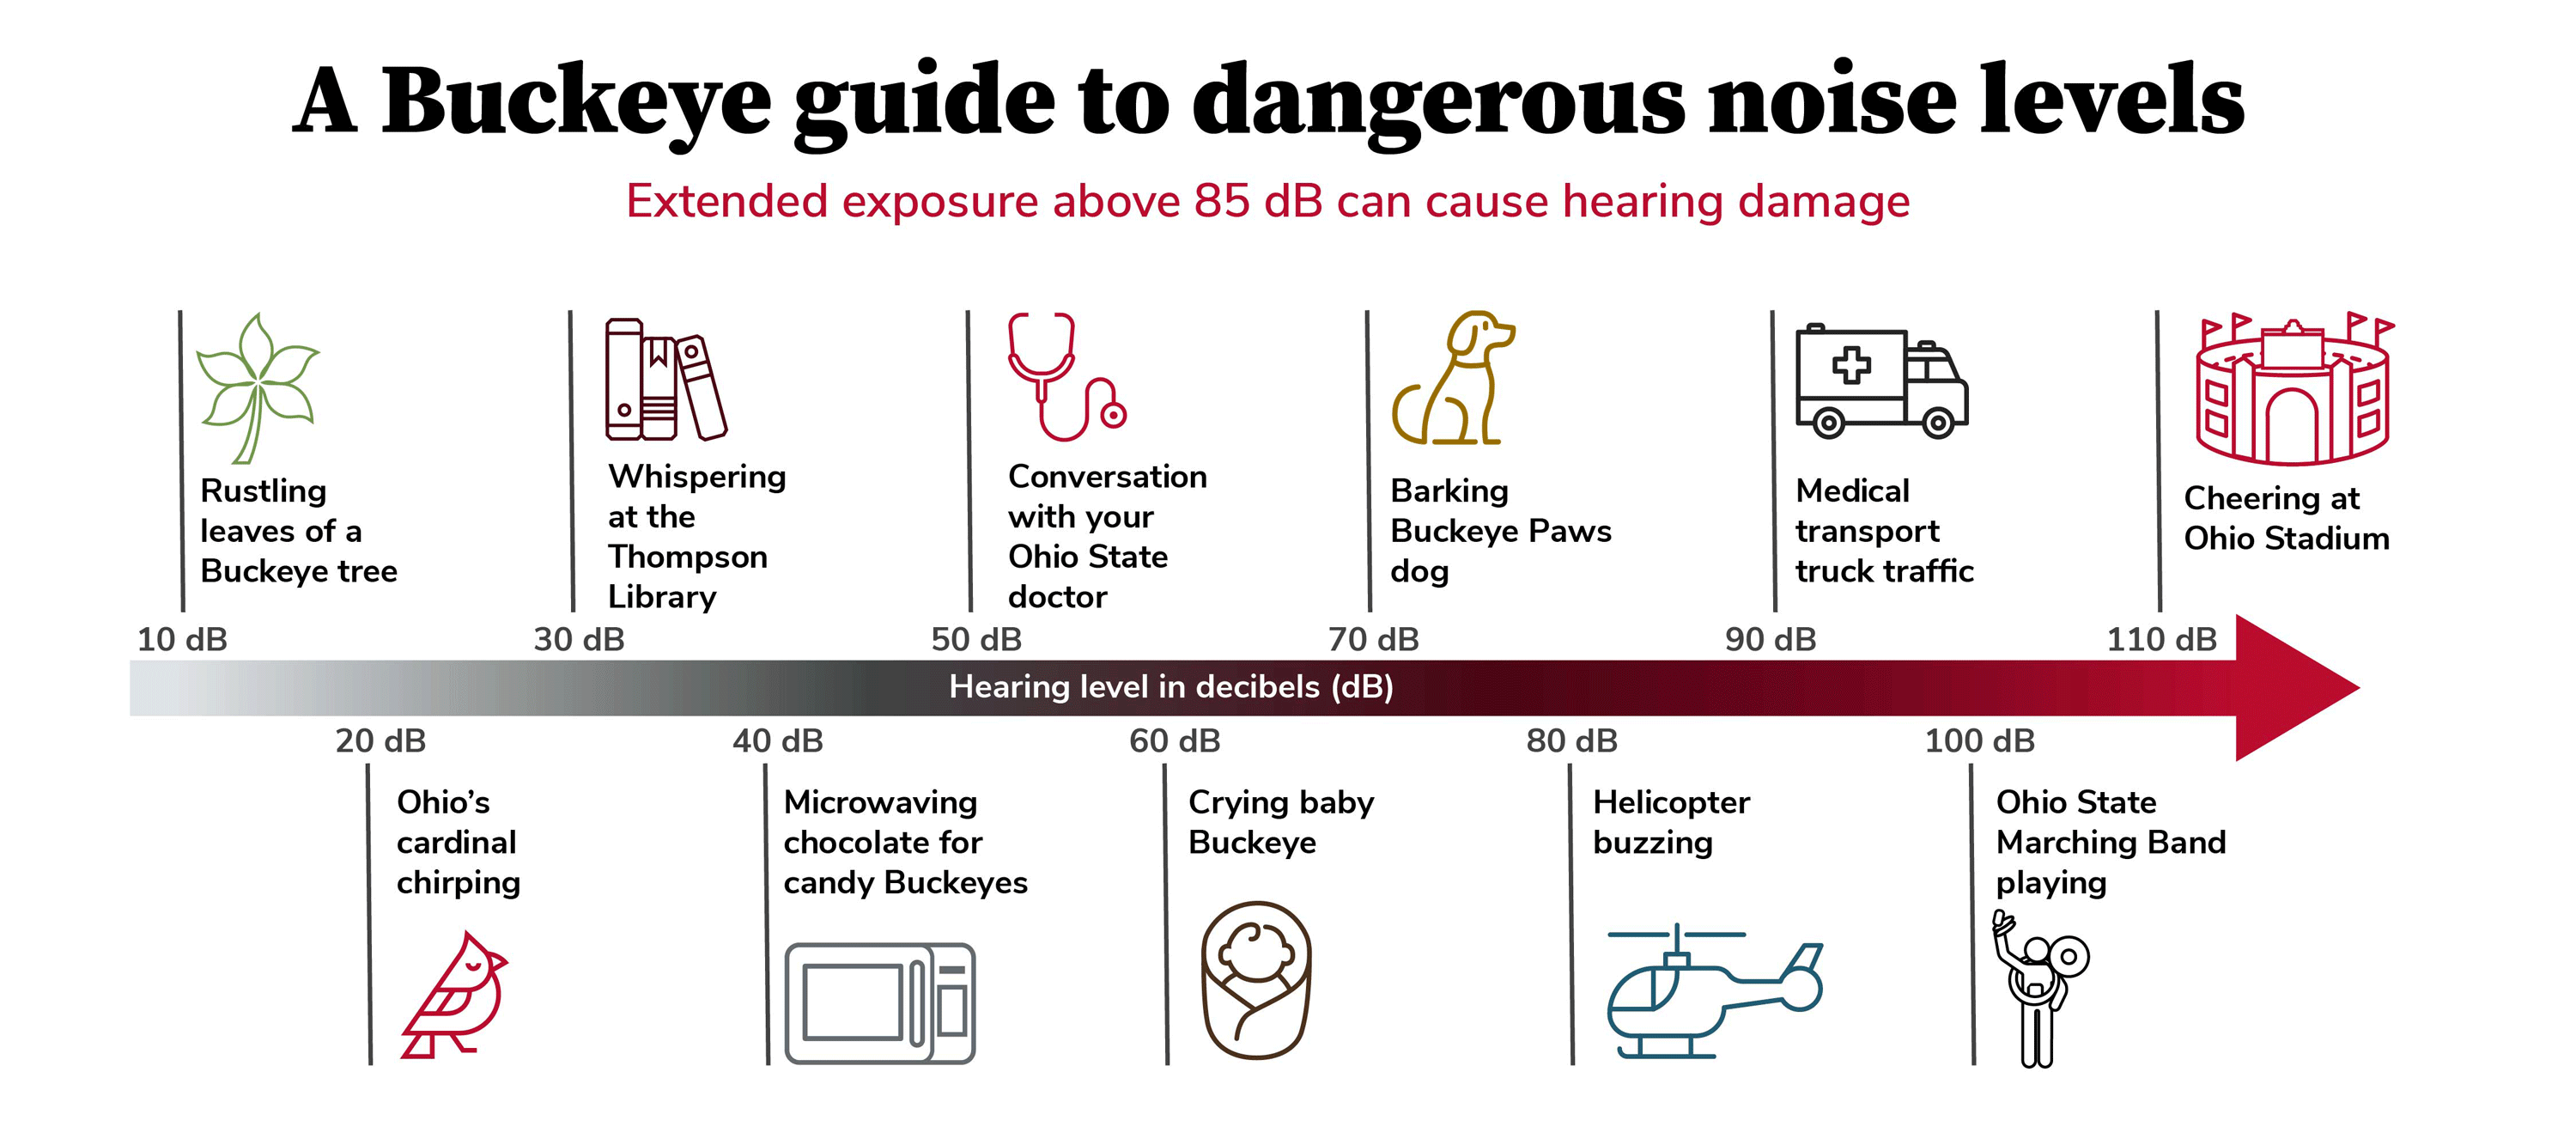 Illustration guide of dangerous decibel exposure that can cause hearing damage